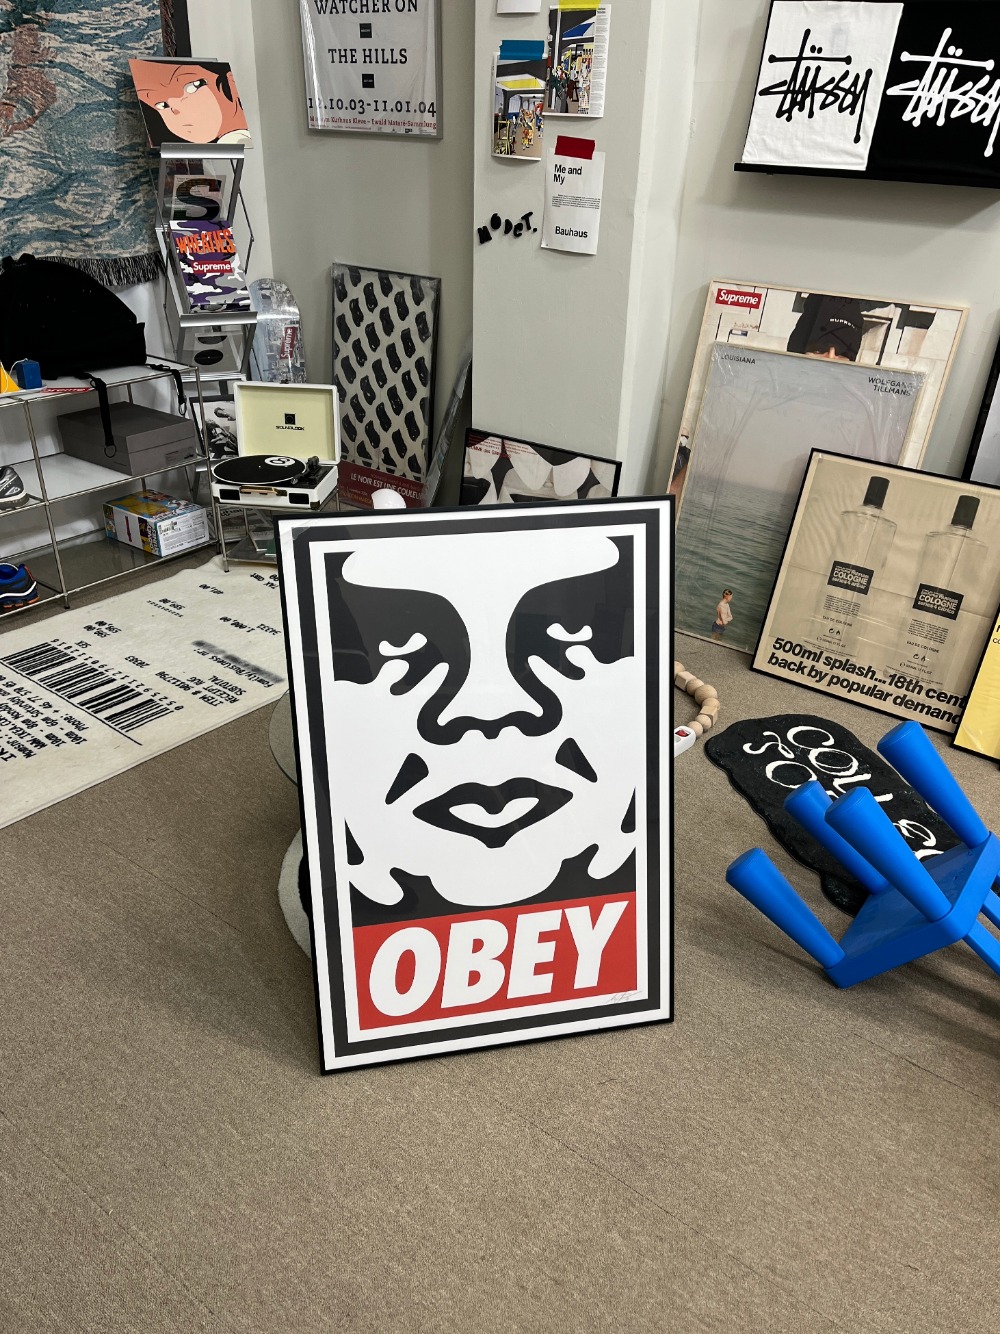 Obey ICON (Signed) Art By SHEPARD FAIREY